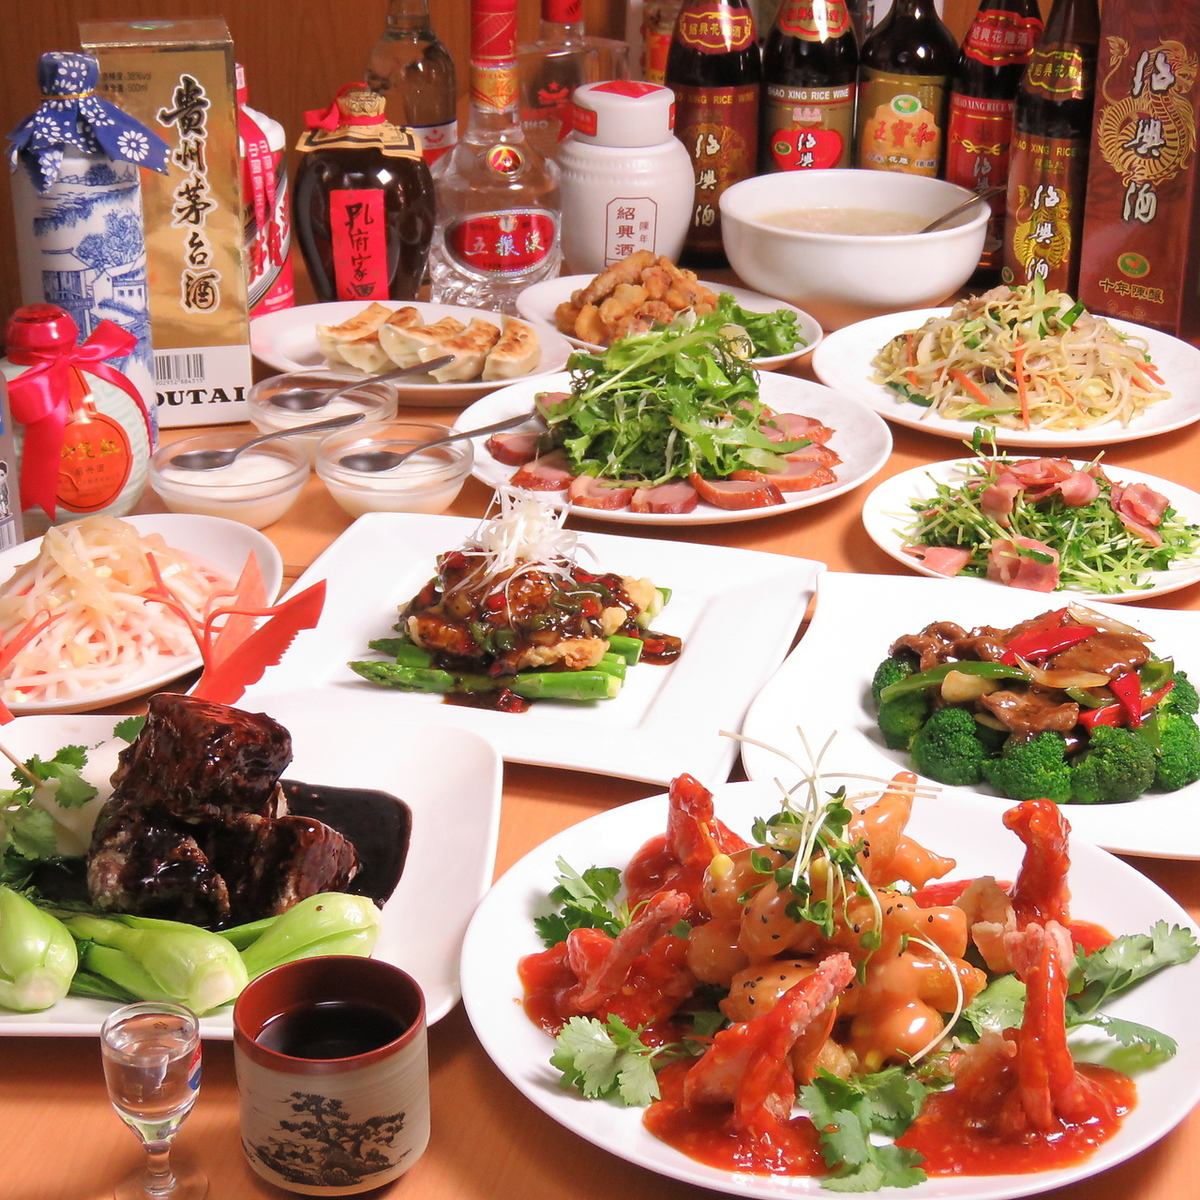 All-you-can-eat authentic Chinese food ♪ All-you-can-drink is also included!